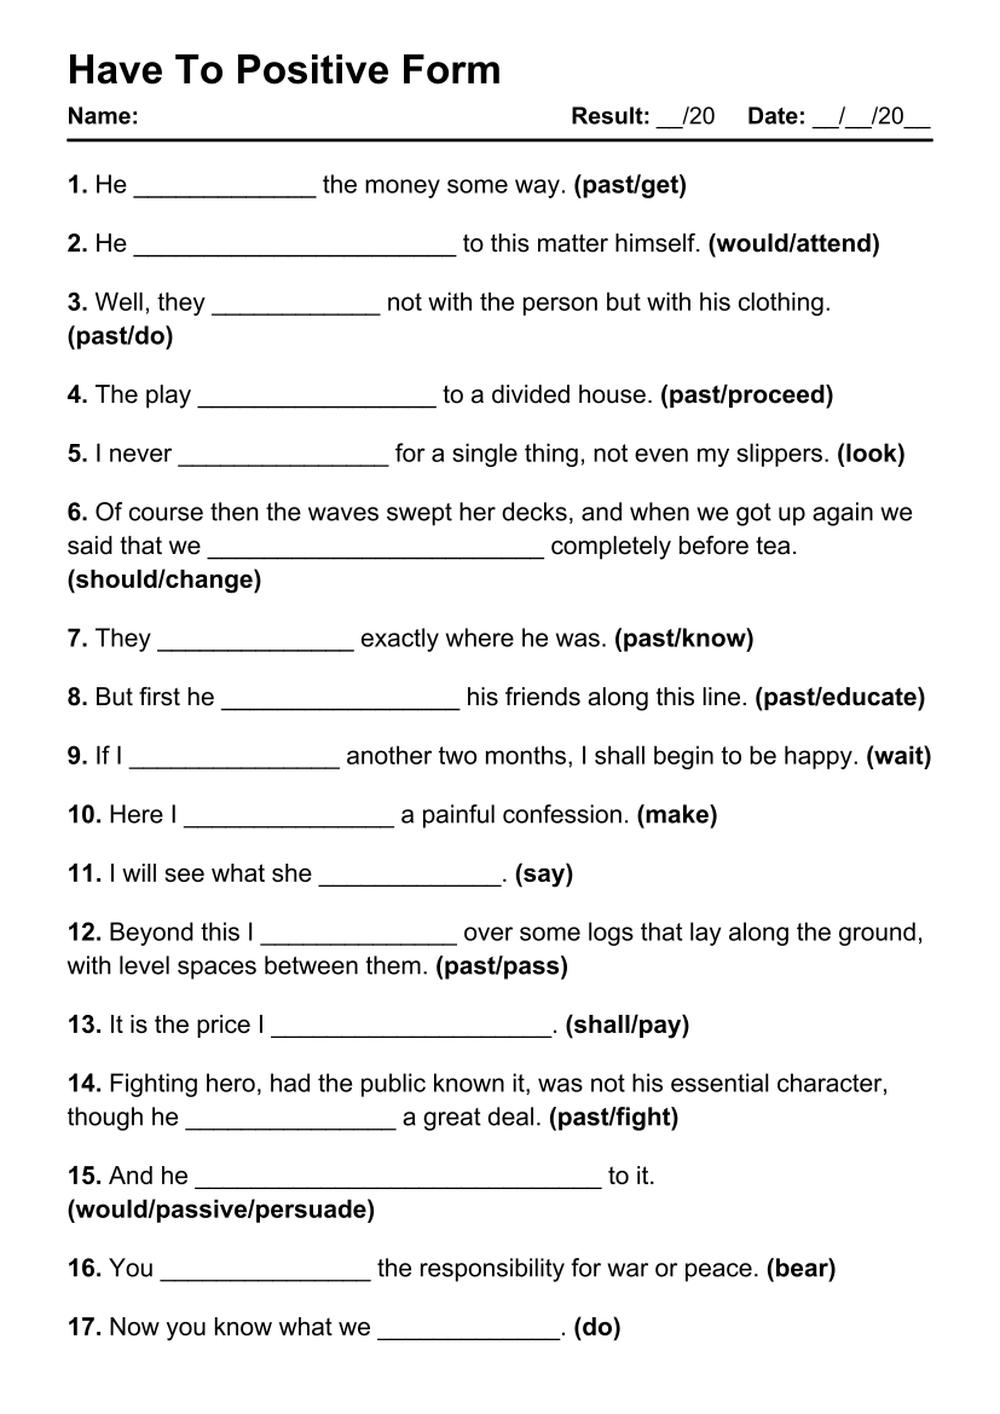 Printable Have To Positive Exercises - PDF Worksheet with Answers - Test 23